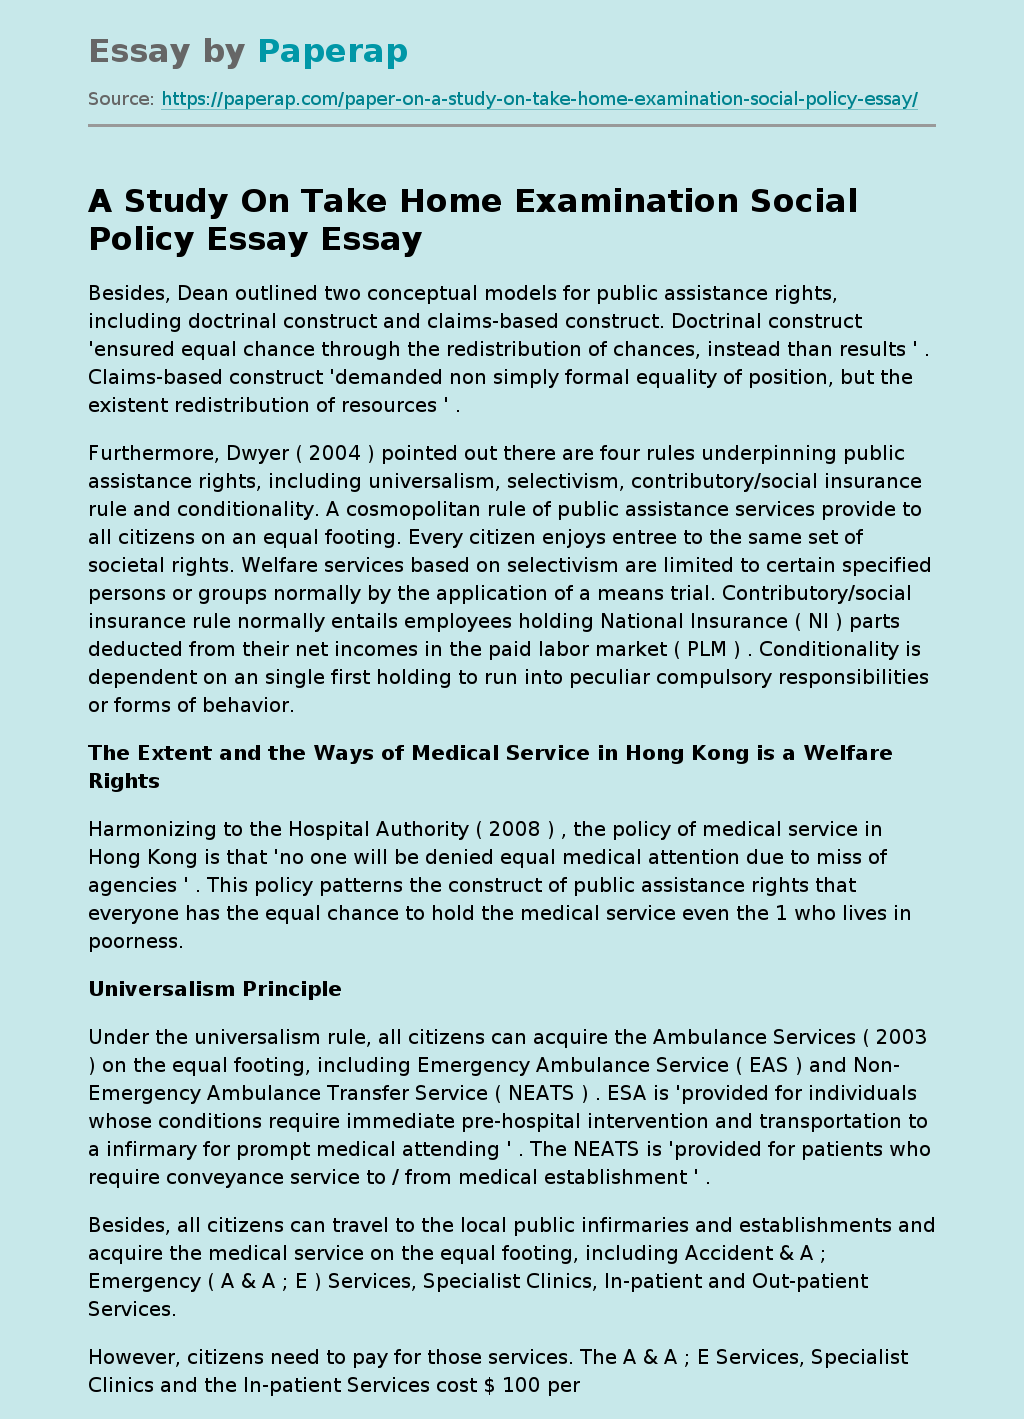 A Study On Take Home Examination Social Policy Essay